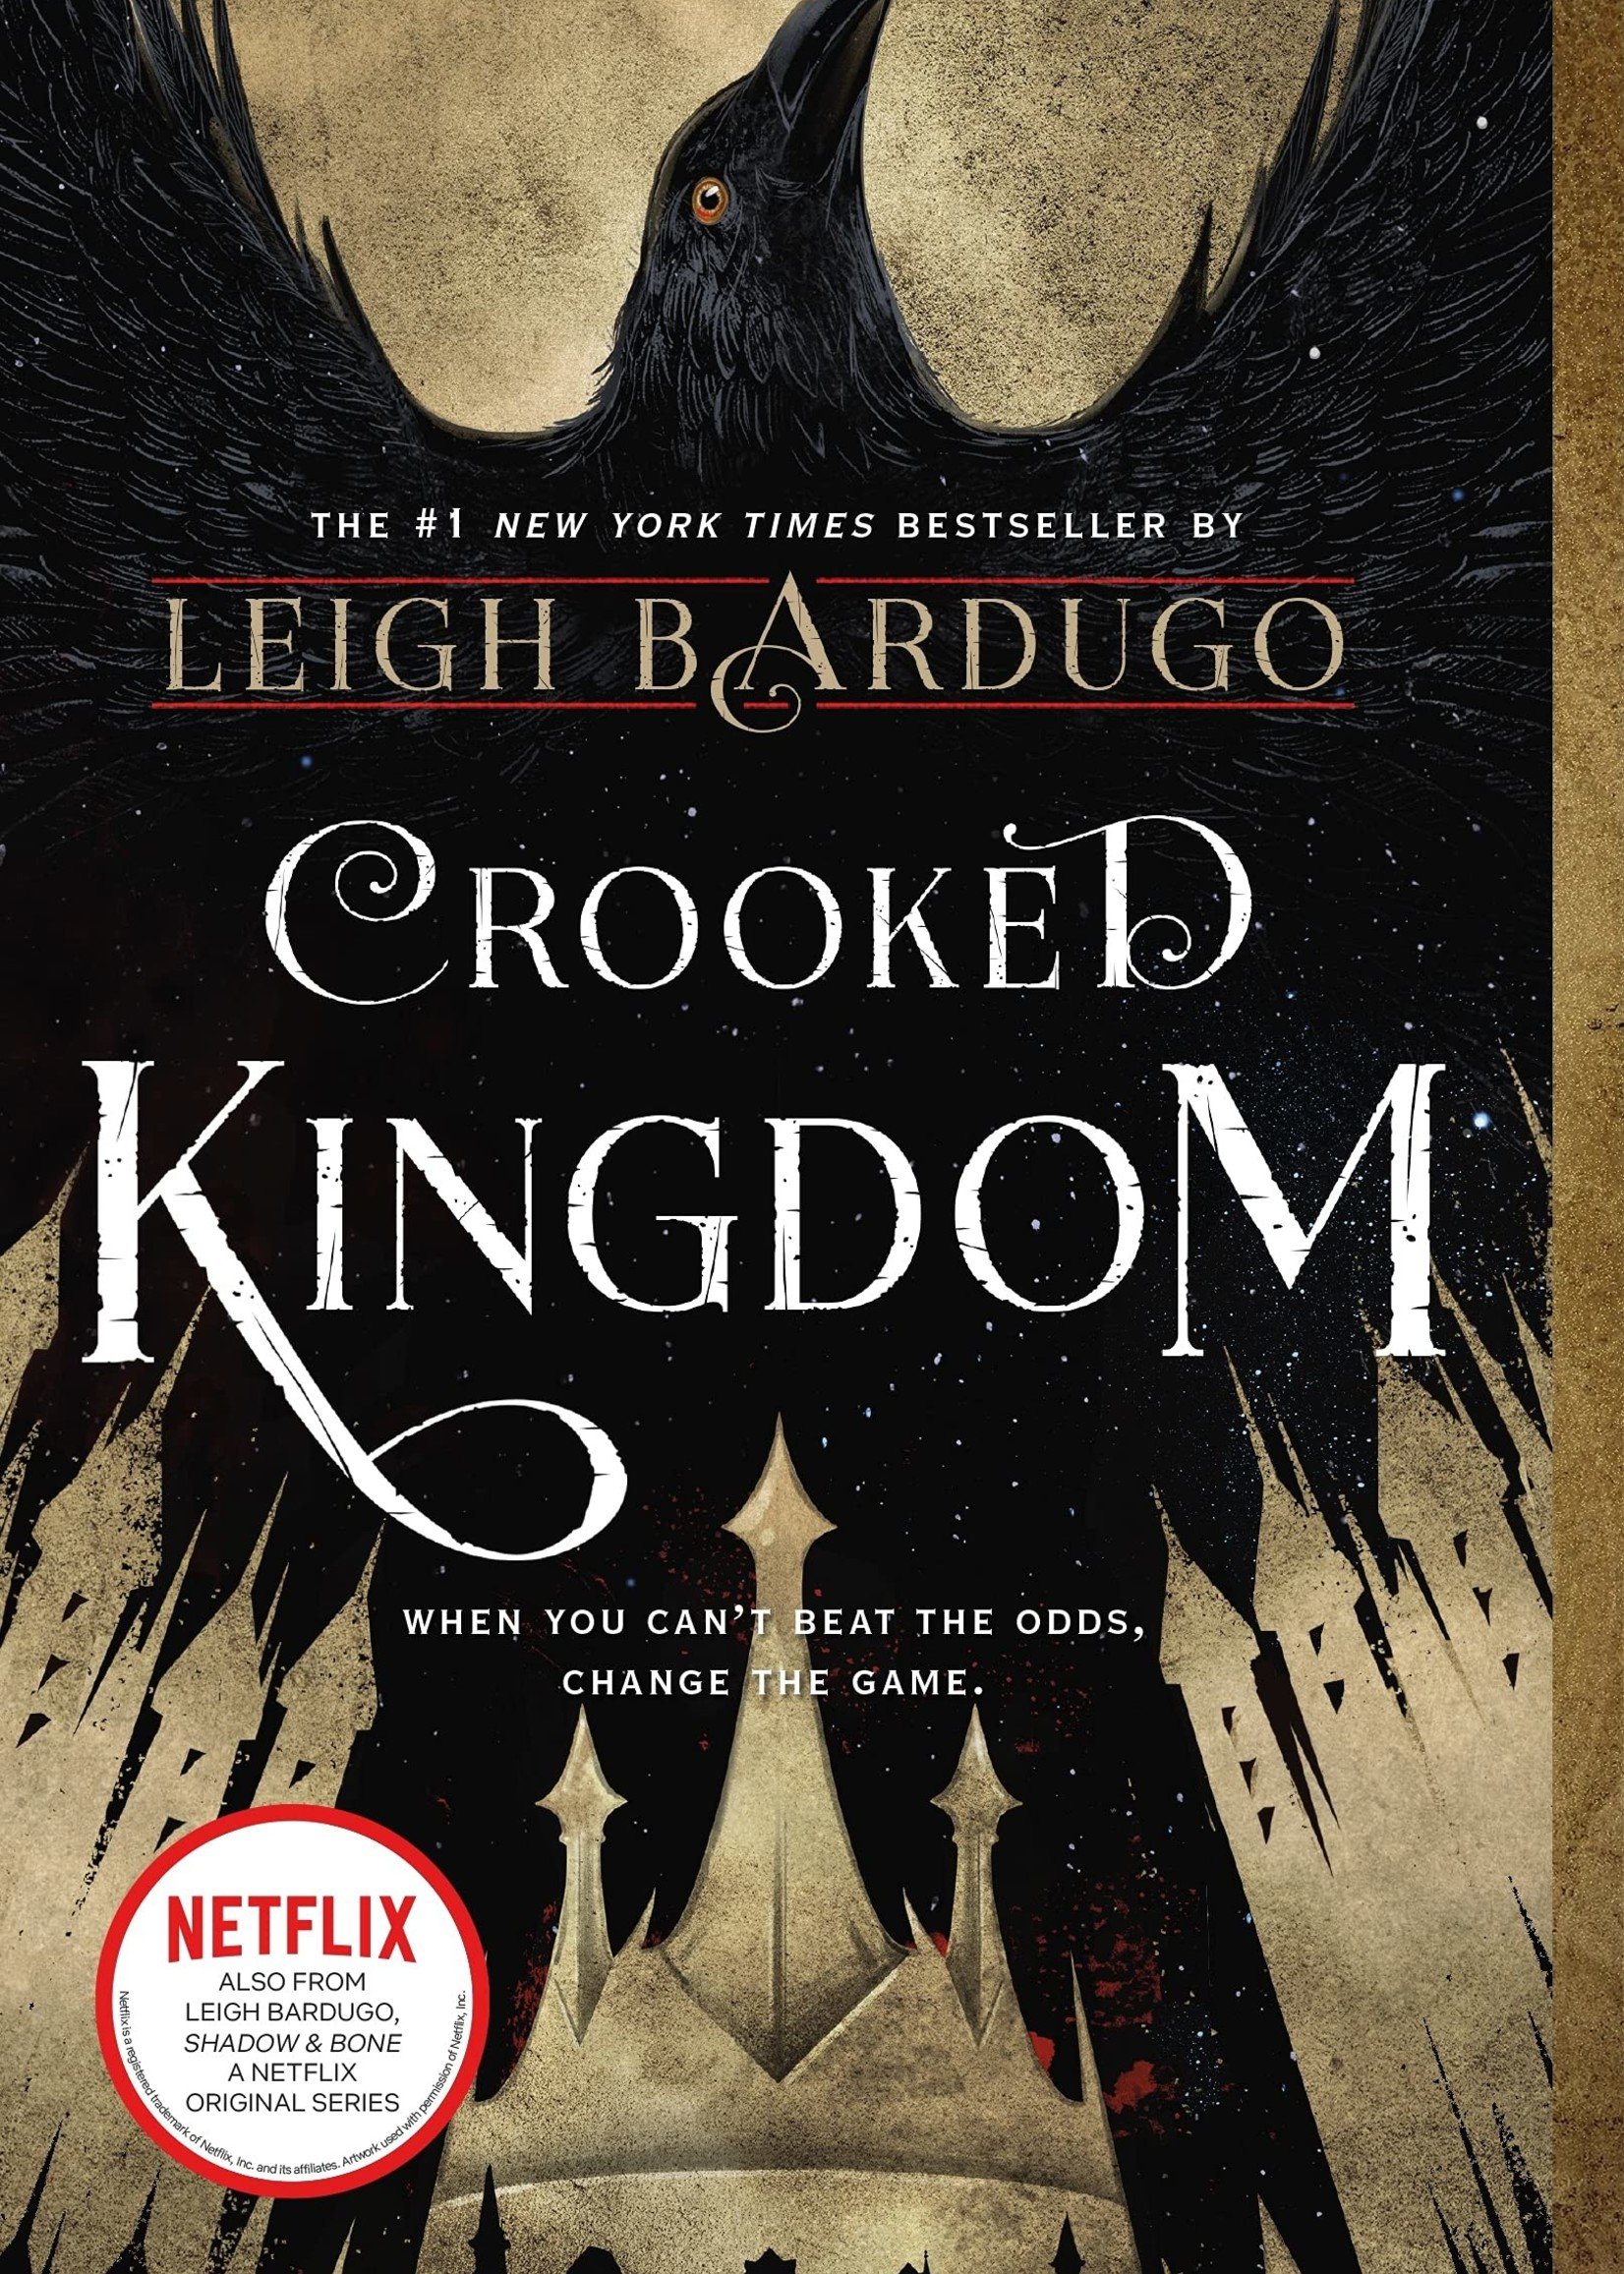 Shadow and Bone (Shadow and Bone Trilogy #1) by Leigh Bardugo, Paperback